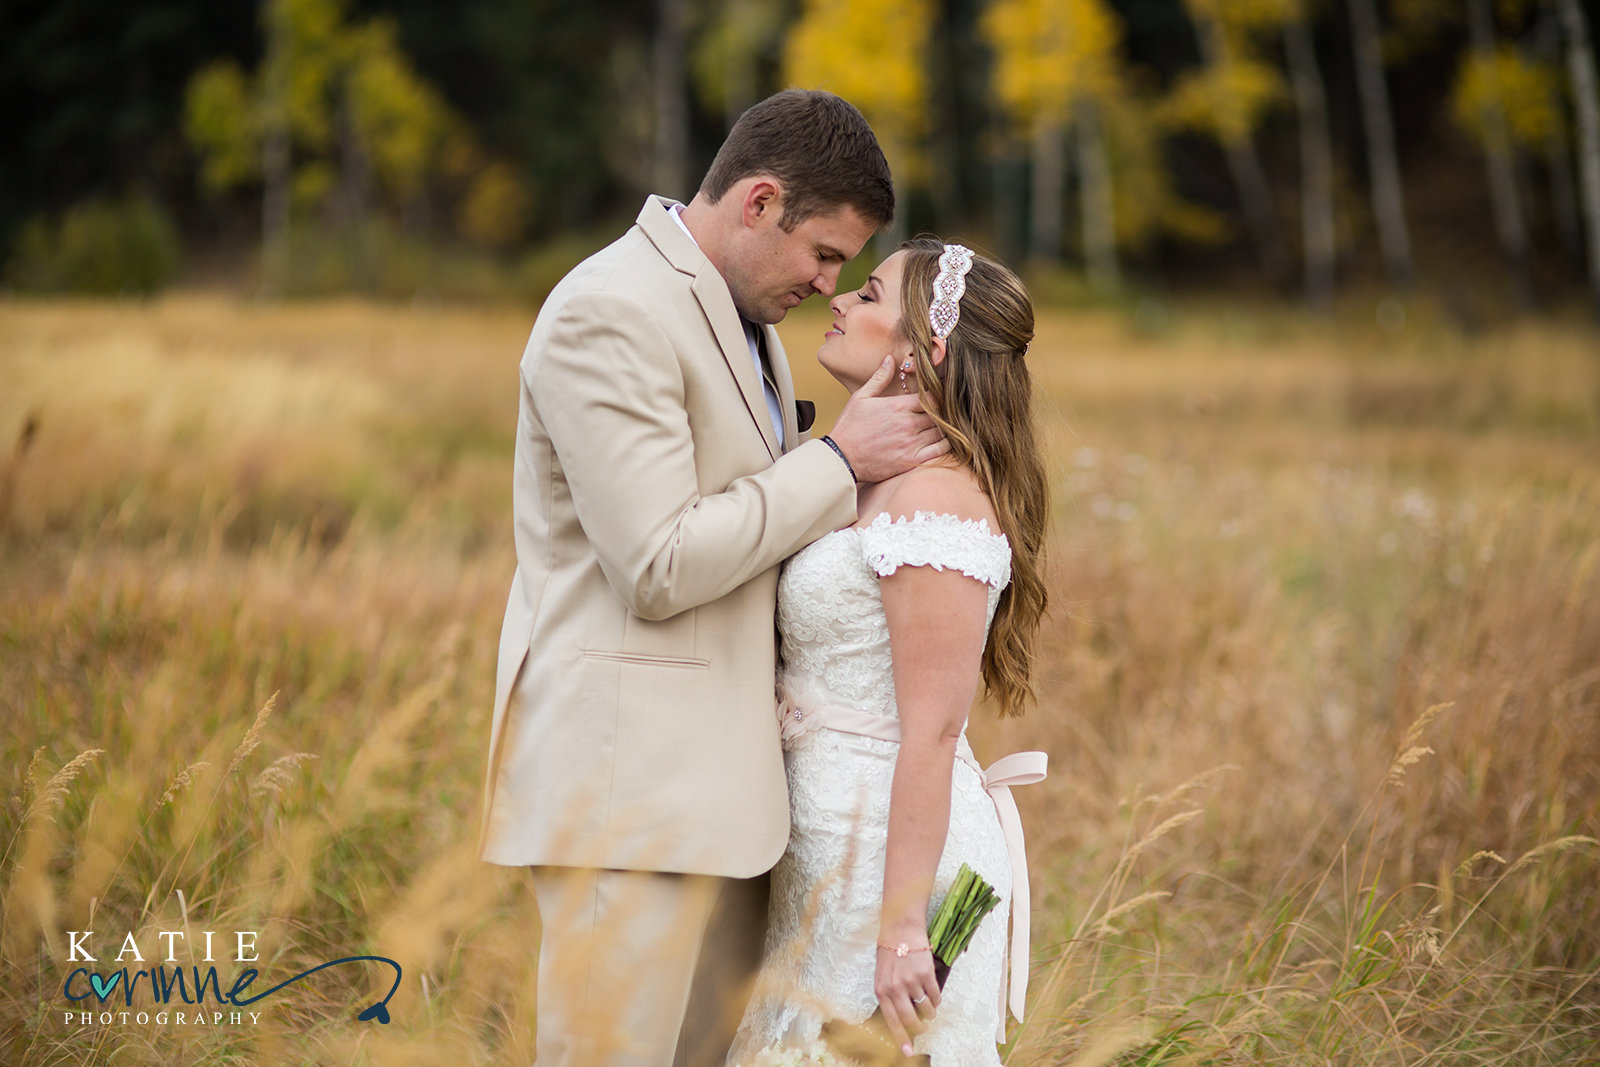 Fall Colors with Bride and Groom